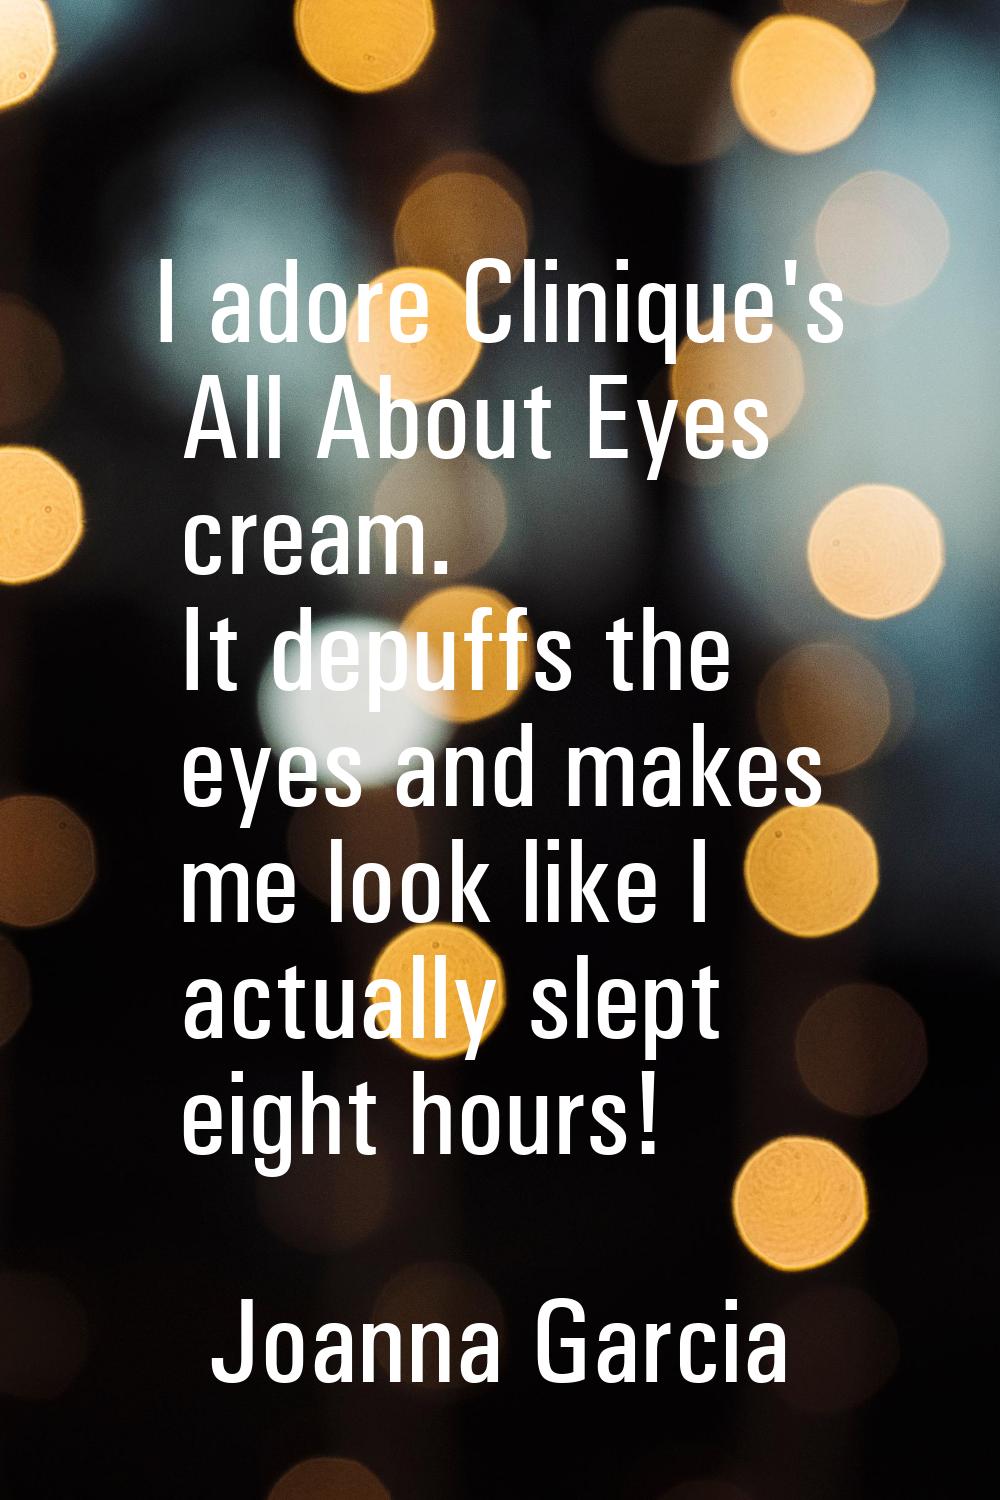 I adore Clinique's All About Eyes cream. It depuffs the eyes and makes me look like I actually slep